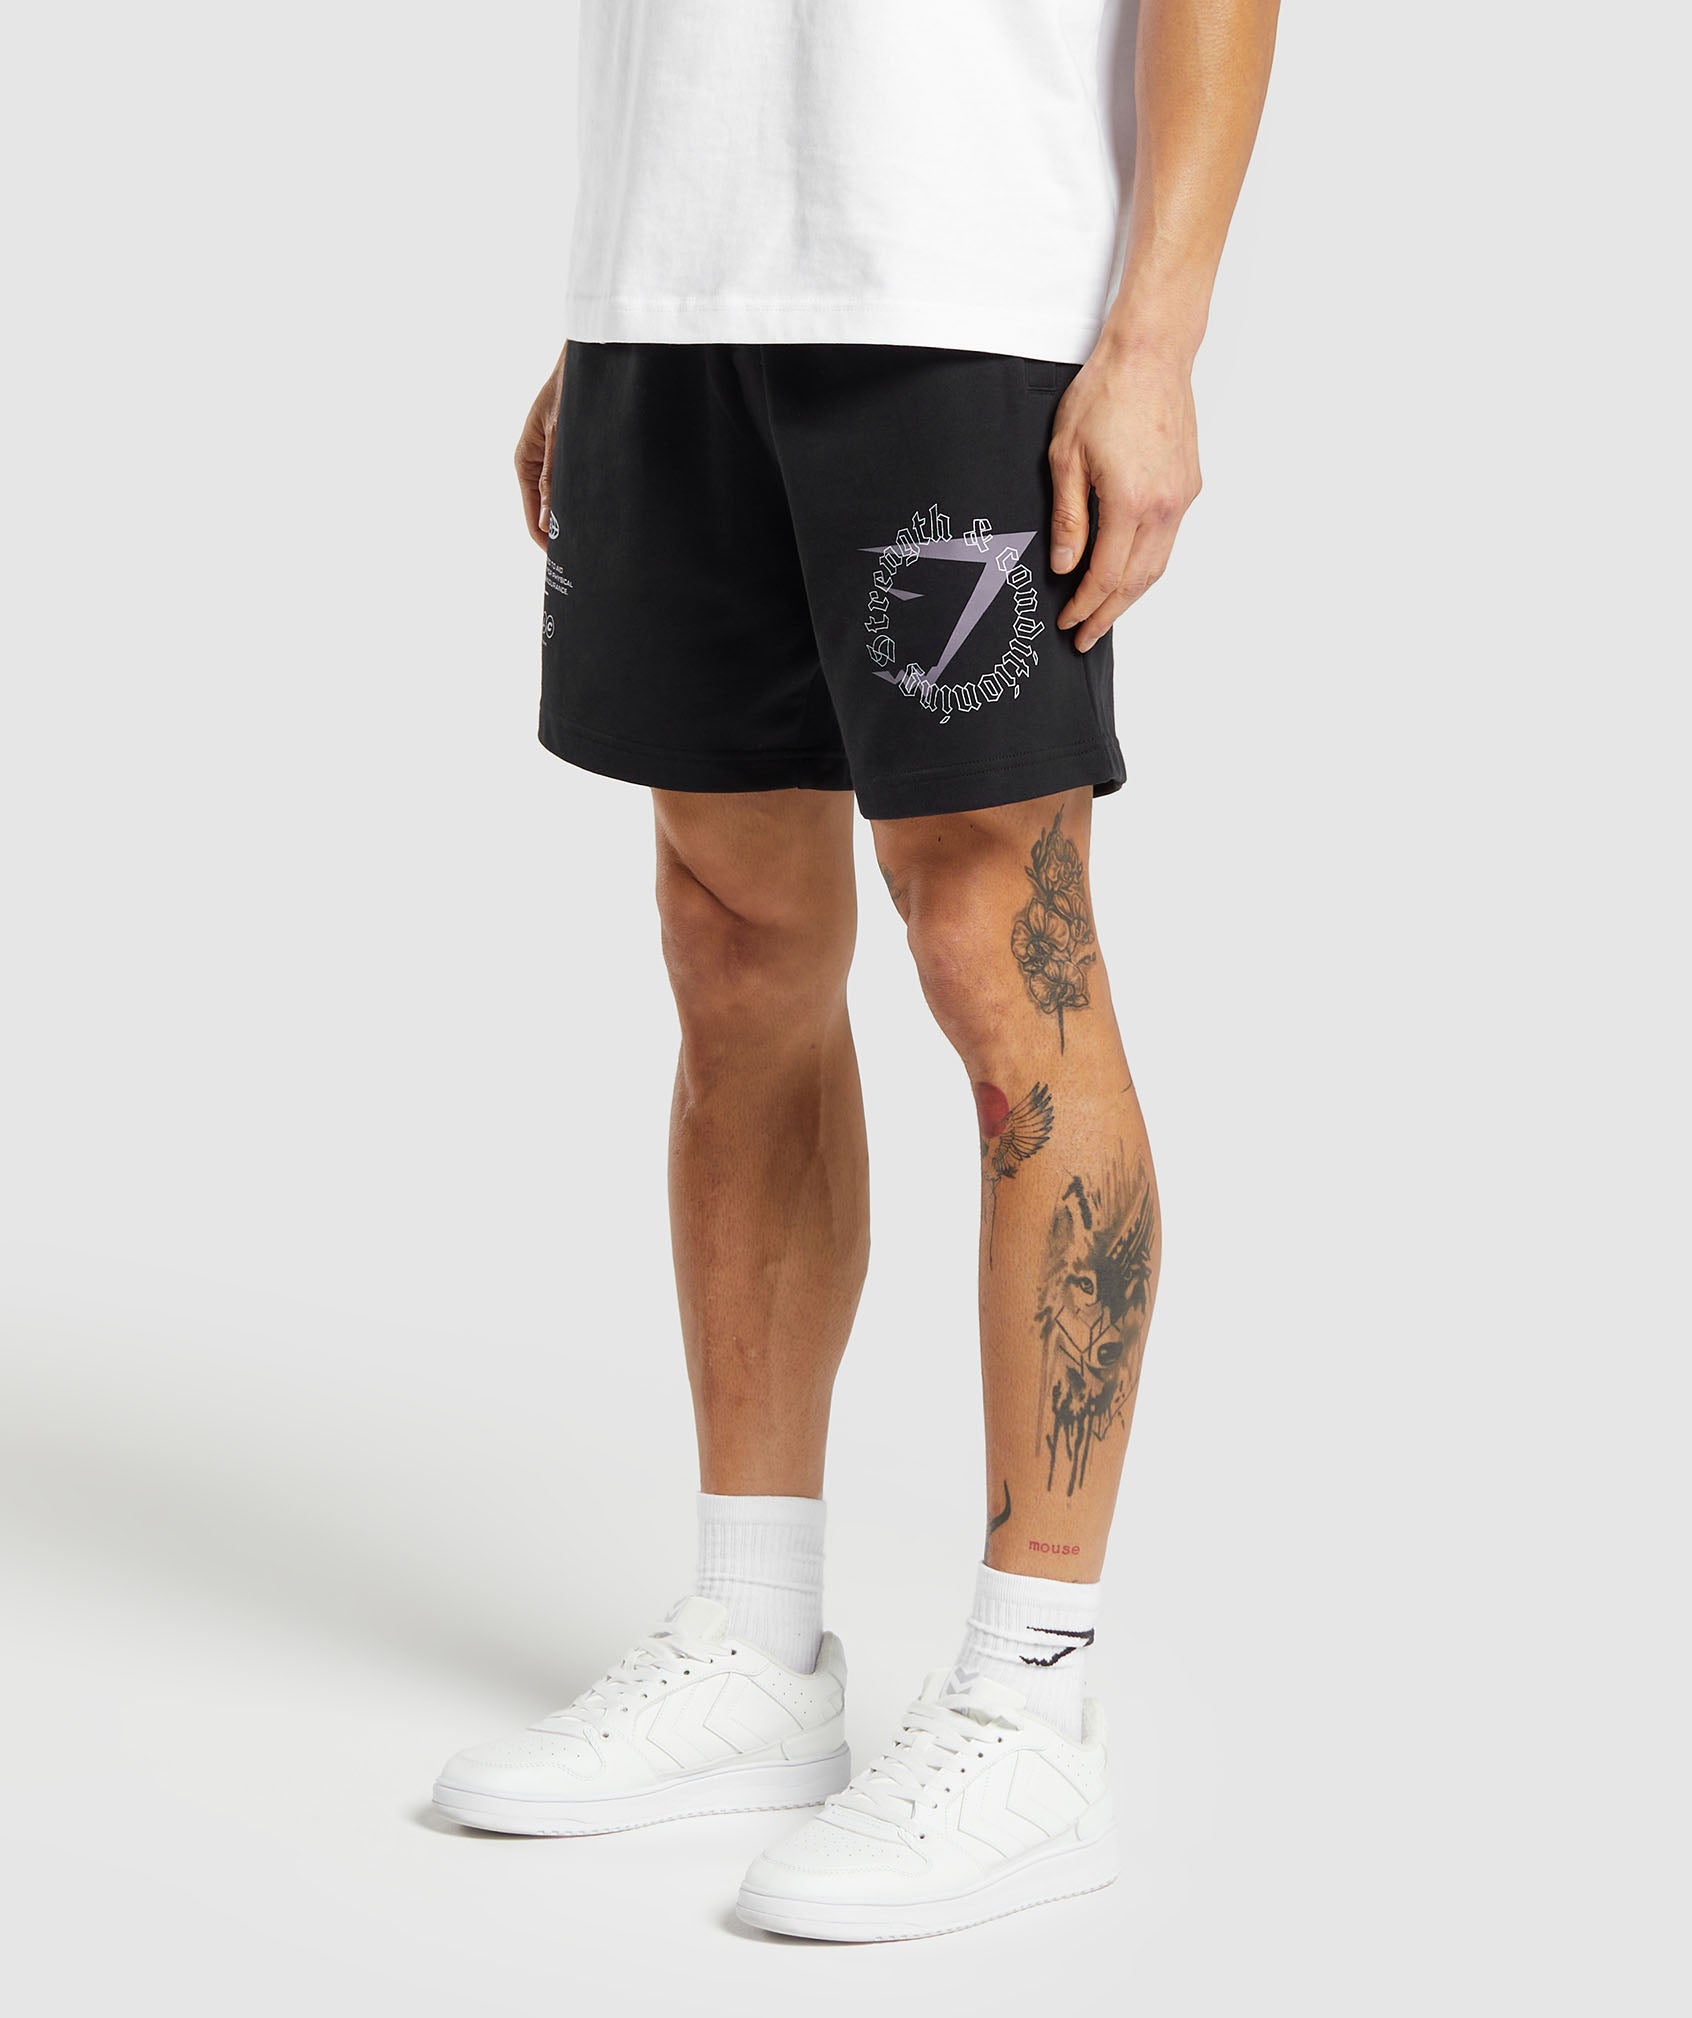 Strength and Conditioning 7" Shorts in Black - view 2